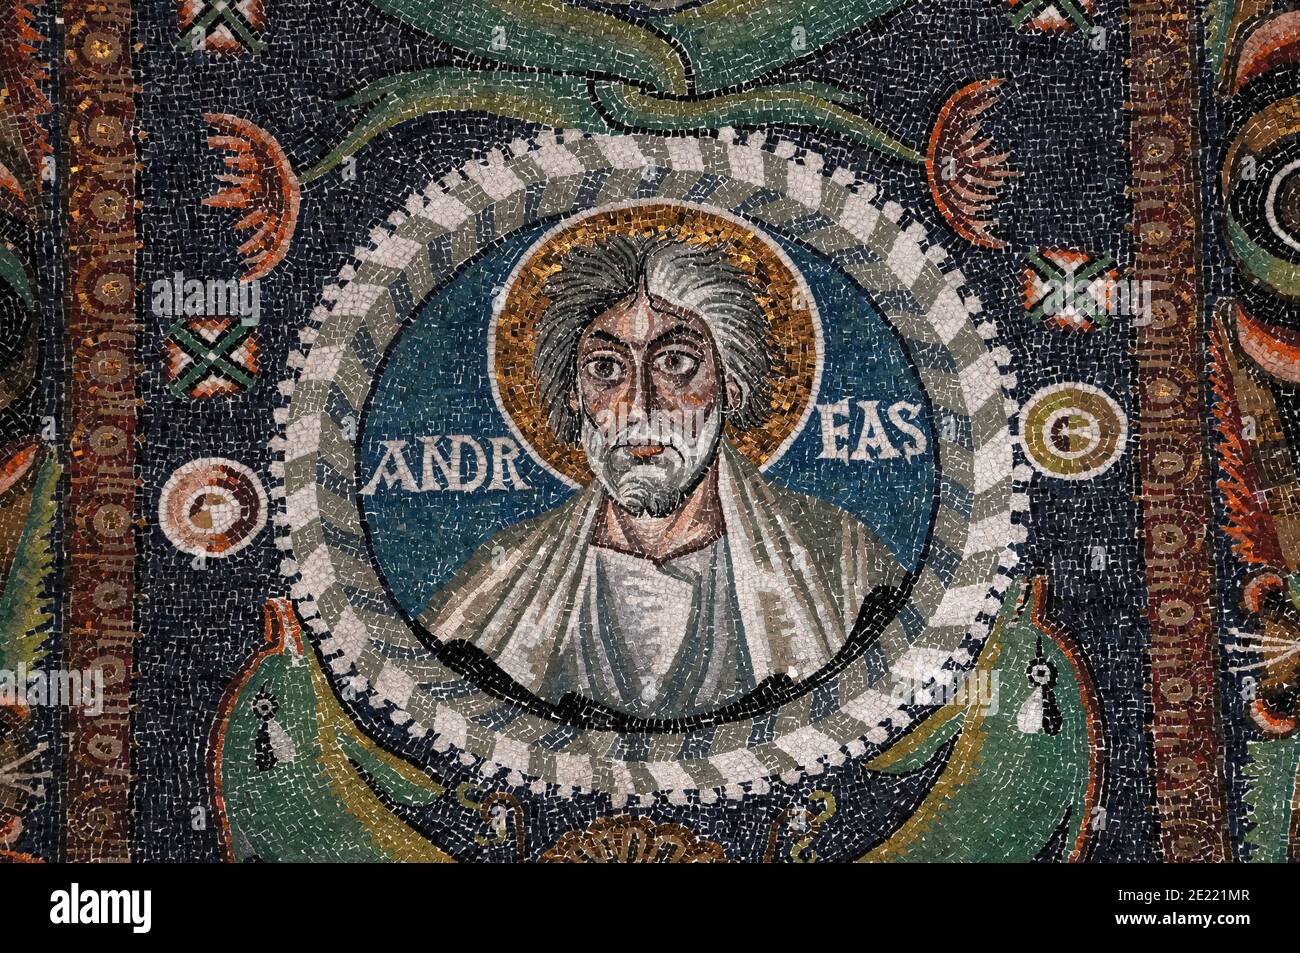 Apostle and martyr Saint Andrew (here ‘Andreas’) with wild hair. Byzantine mosaic in the Basilica di San Vitale at Ravenna, Emilia-Romagna, Italy. The mosaic was created in the 500s AD, a few years after Ravenna was captured by the Byzantine Empire from the Ostrogoths.  Andrew was crucified by the Romans on an X-shaped cross or saltire at Patras, Greece in 60 AD.  He is the patron saint of Scotland and his saltire is used on Scotland’s national flag. Stock Photo